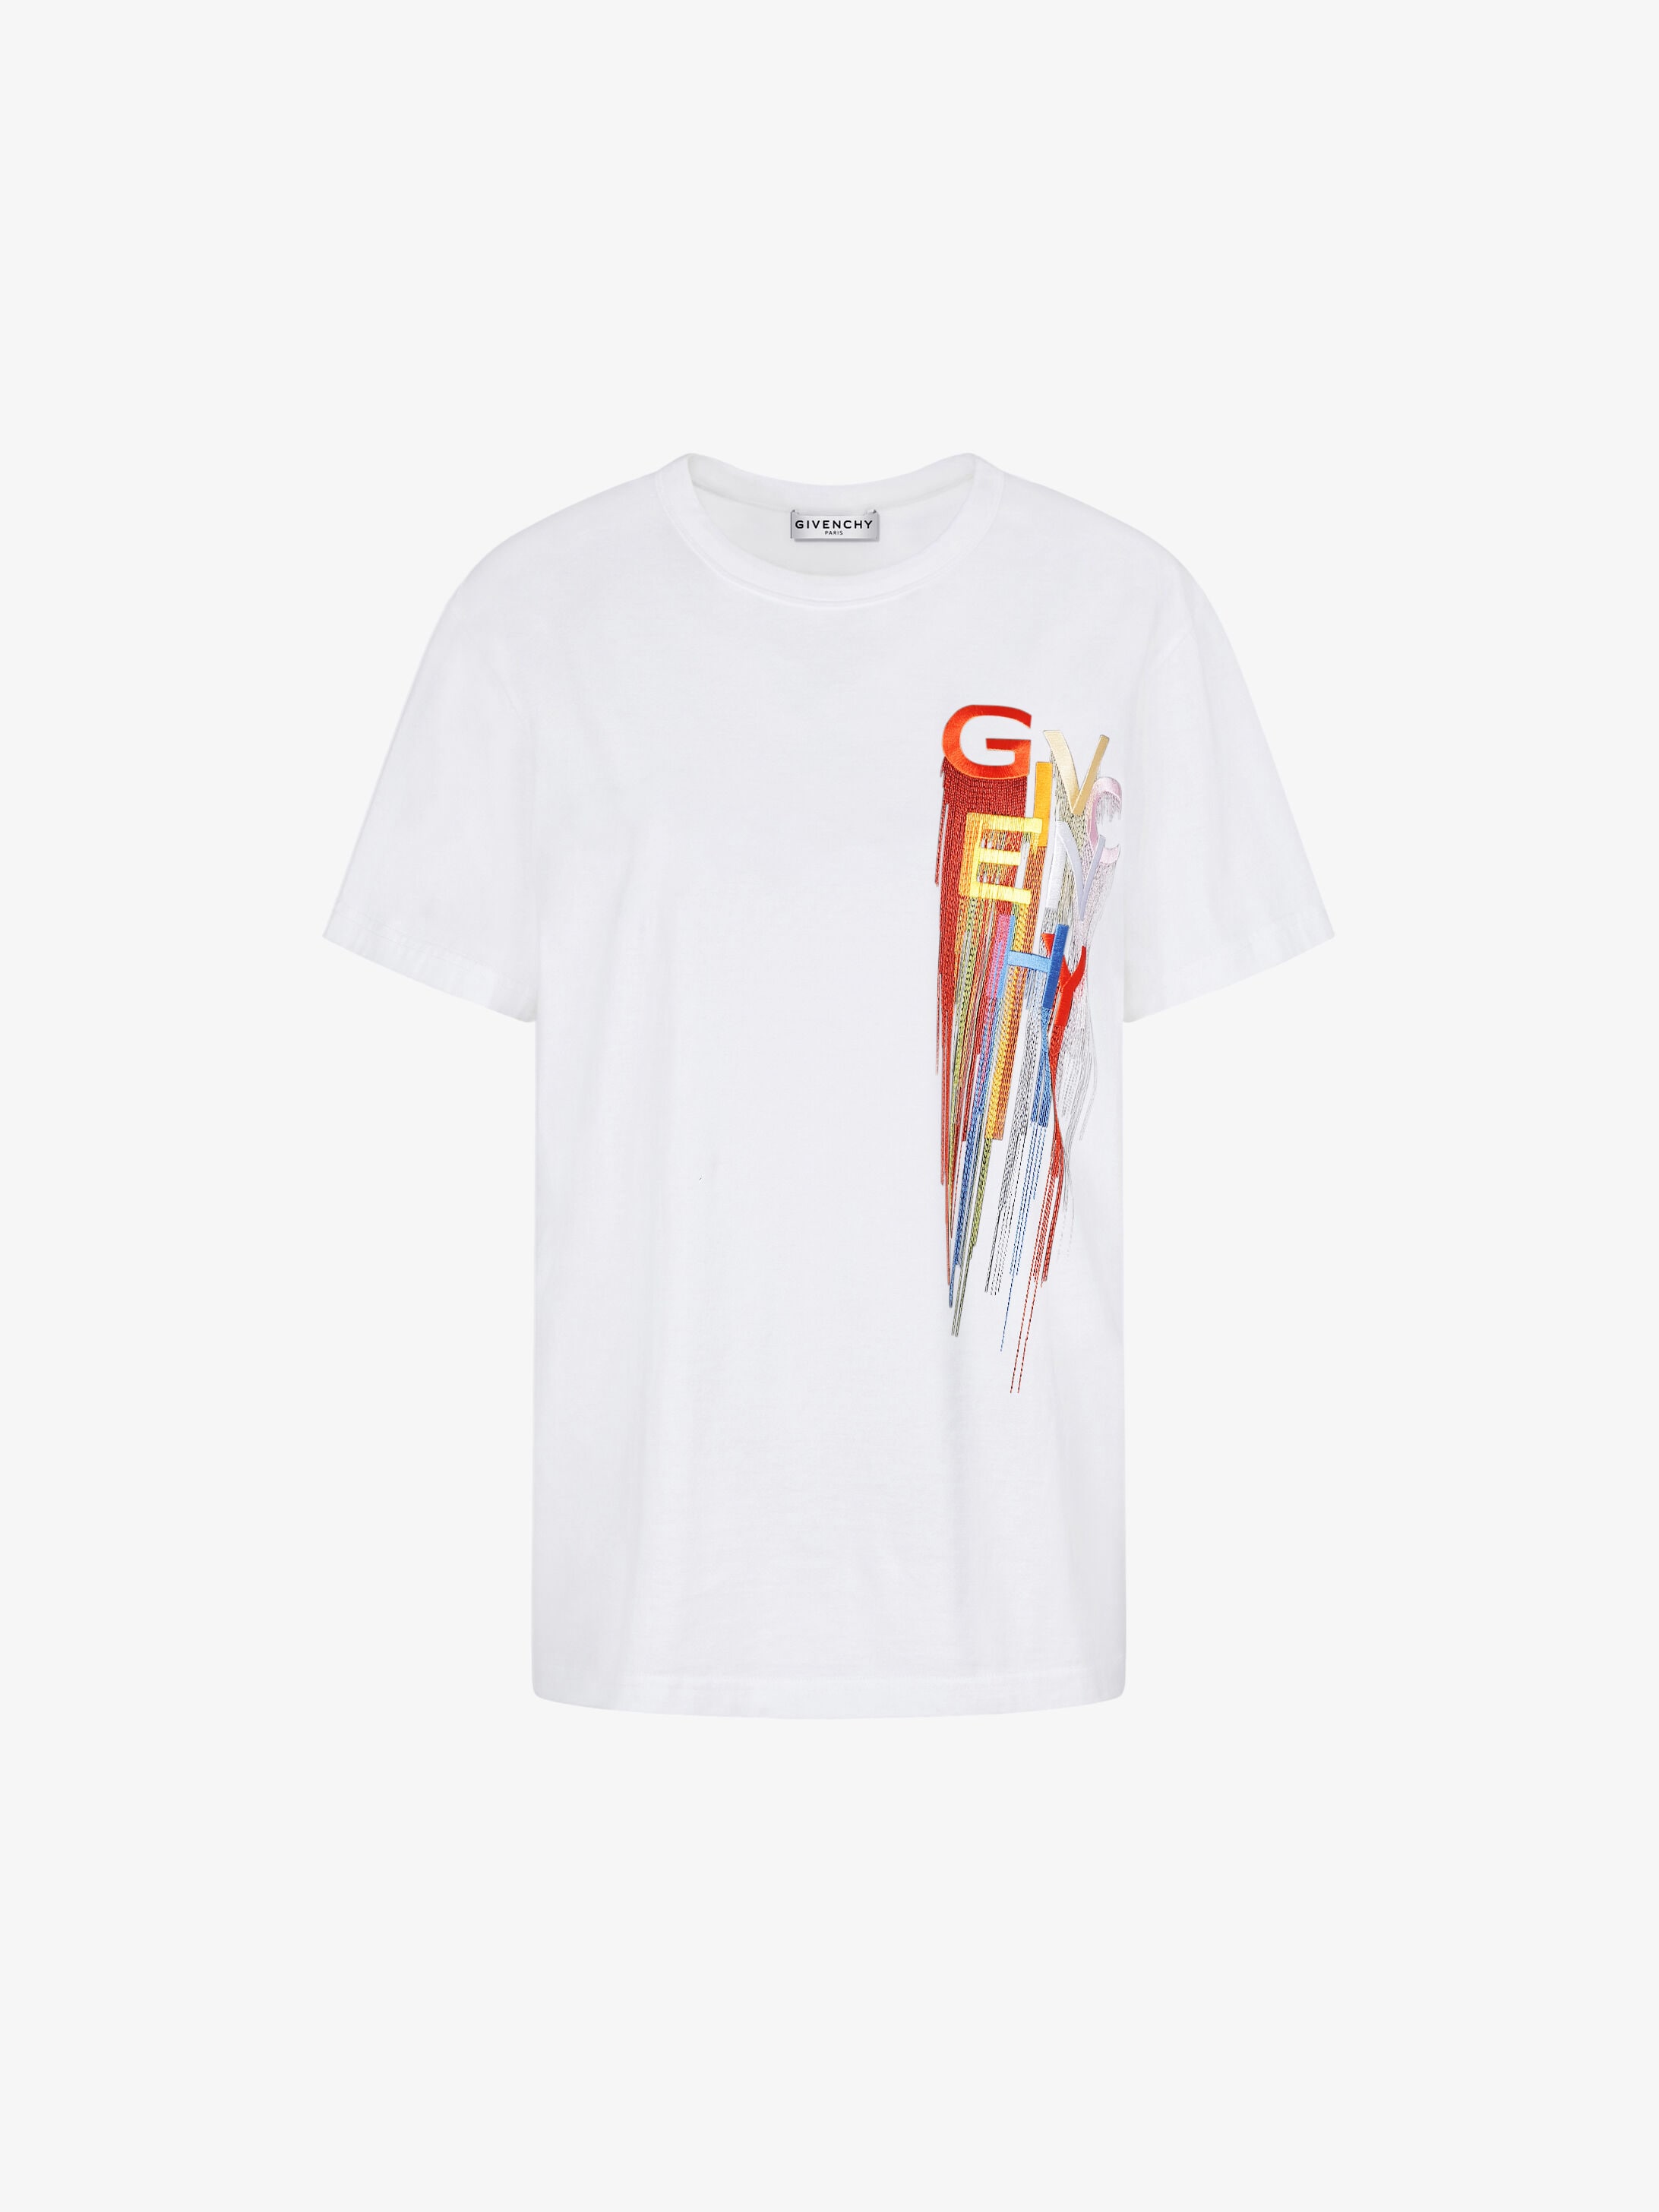 givenchy t shirt women's price